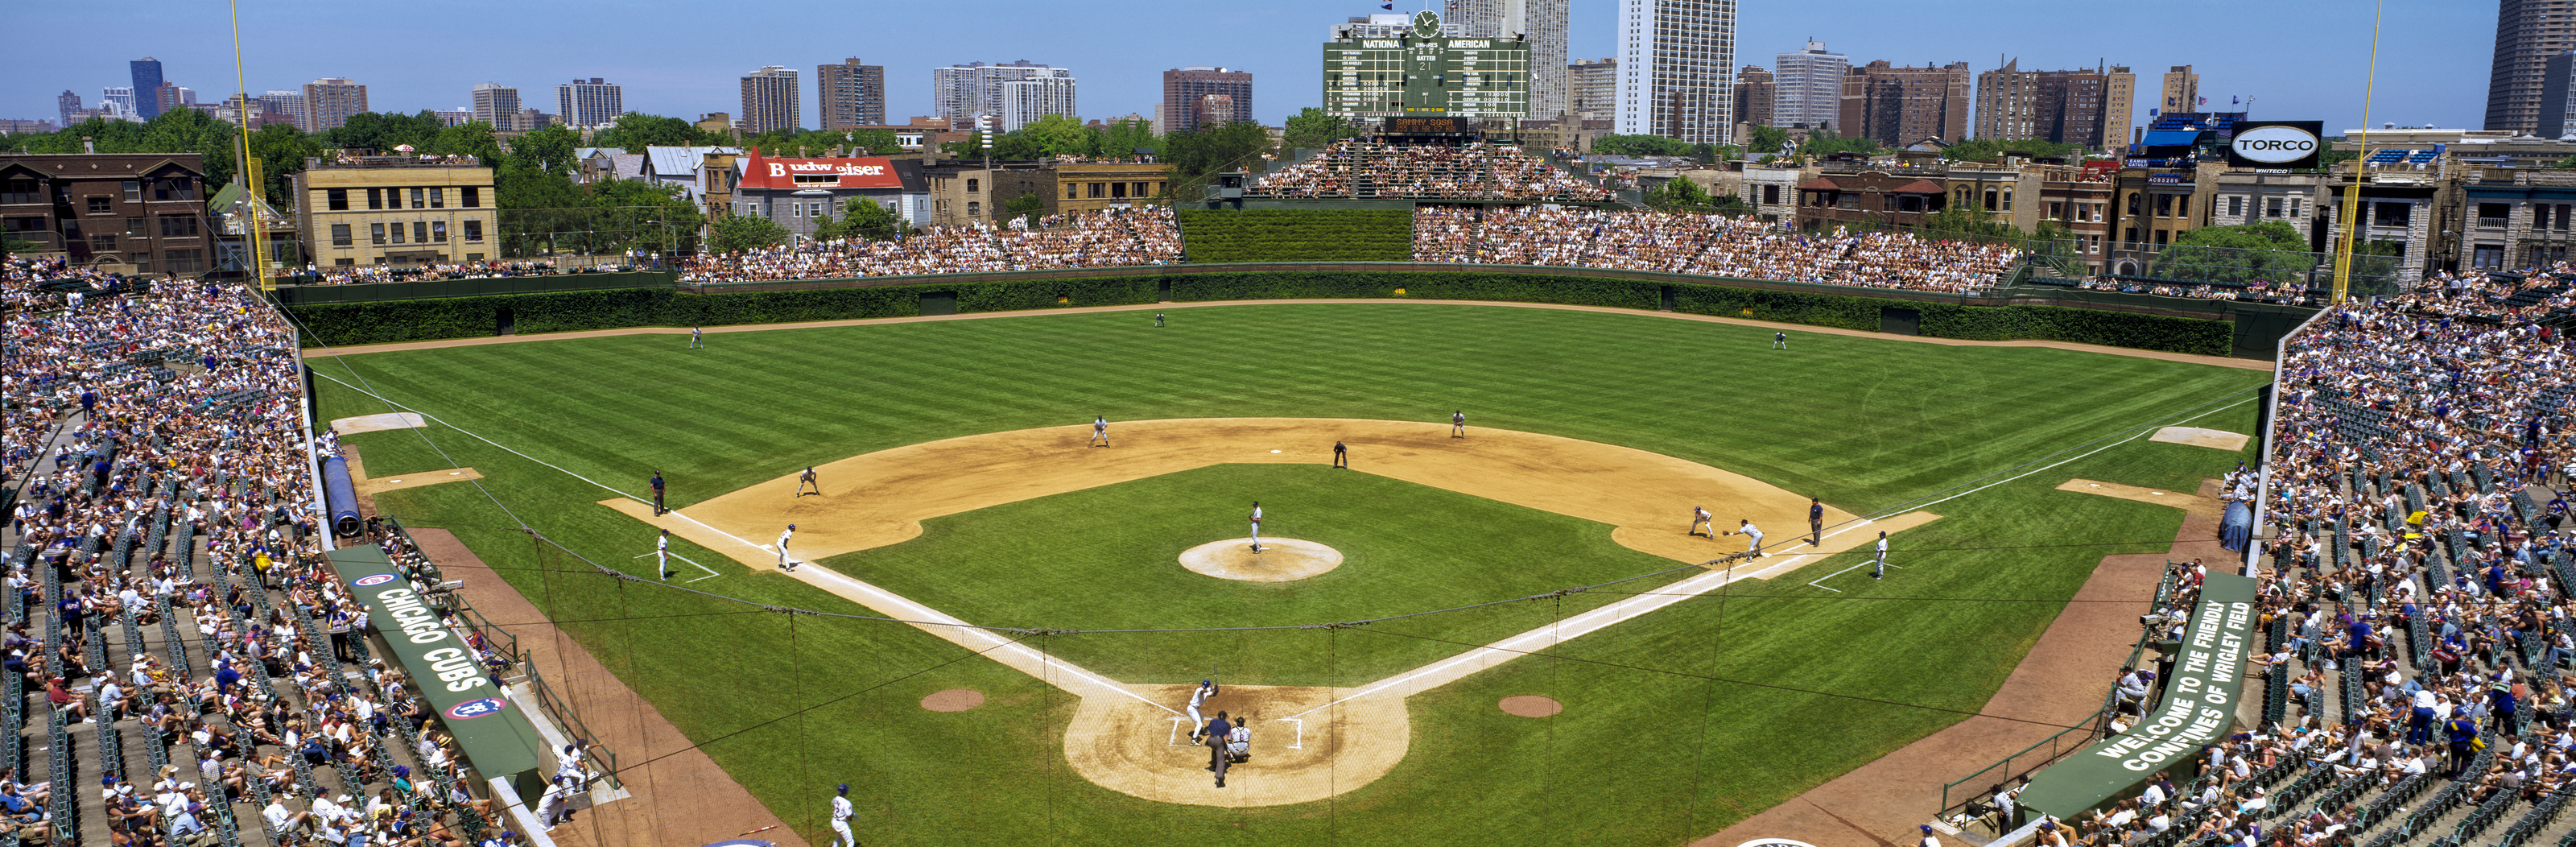 Chicago Cubs vintage photo print Wrigley Field photograph vintage